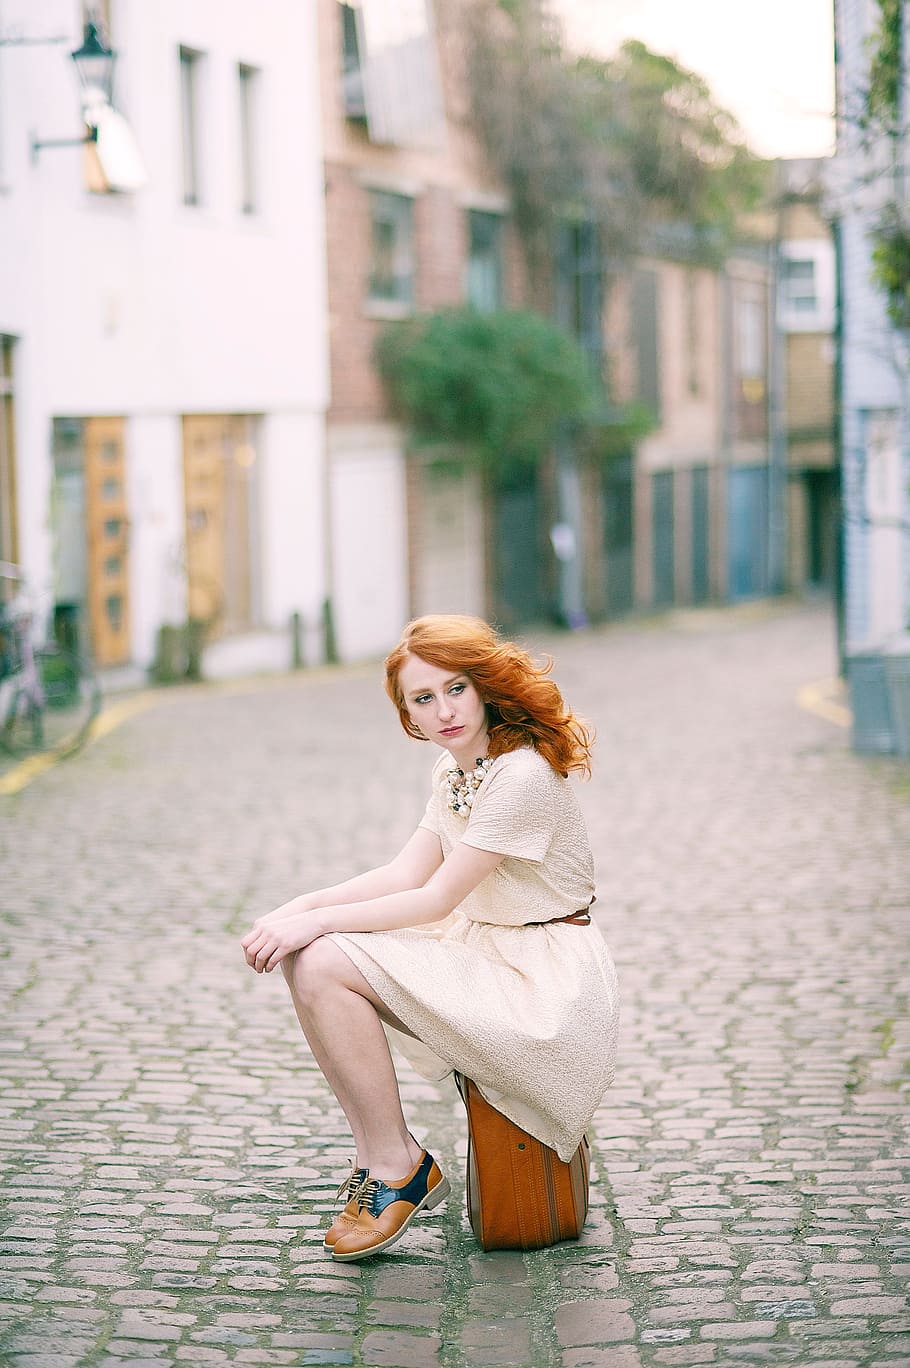 fashion, model, sitting, suitcase, street, cobbles, red haor, girl, female, attractive